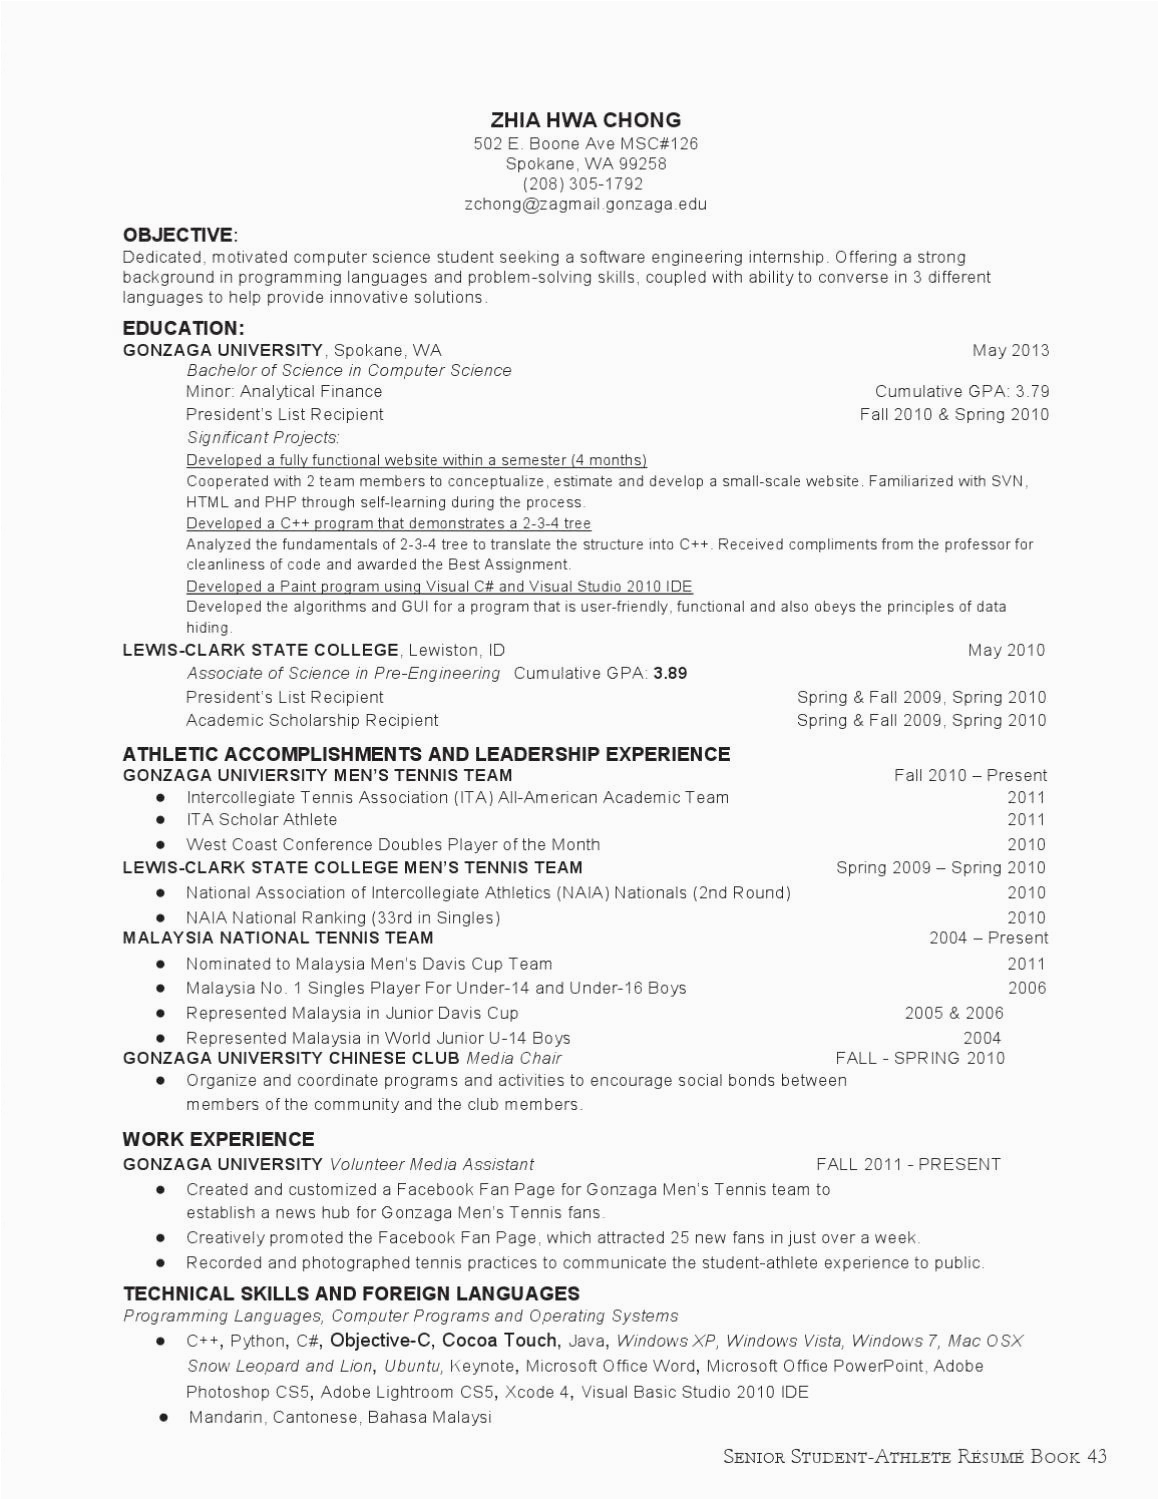 Sample Resume for College Student athlete College Student athlete Resume Example Best Resume Examples